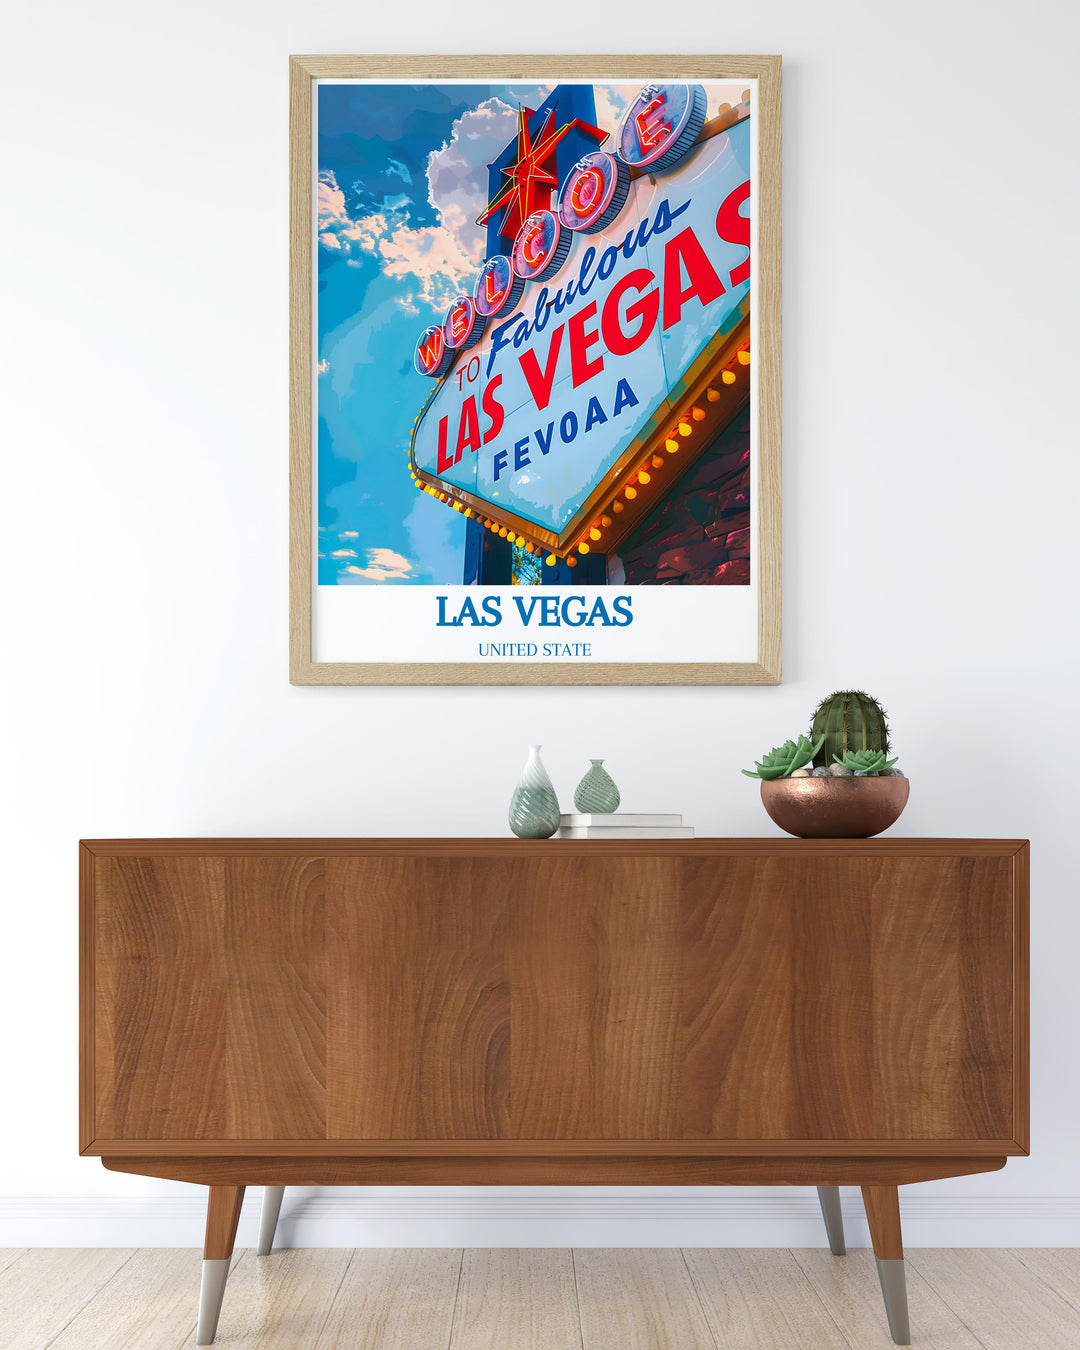 Travel poster highlighting Las Vegas as a key destination, perfect for decorating a home office or living space.